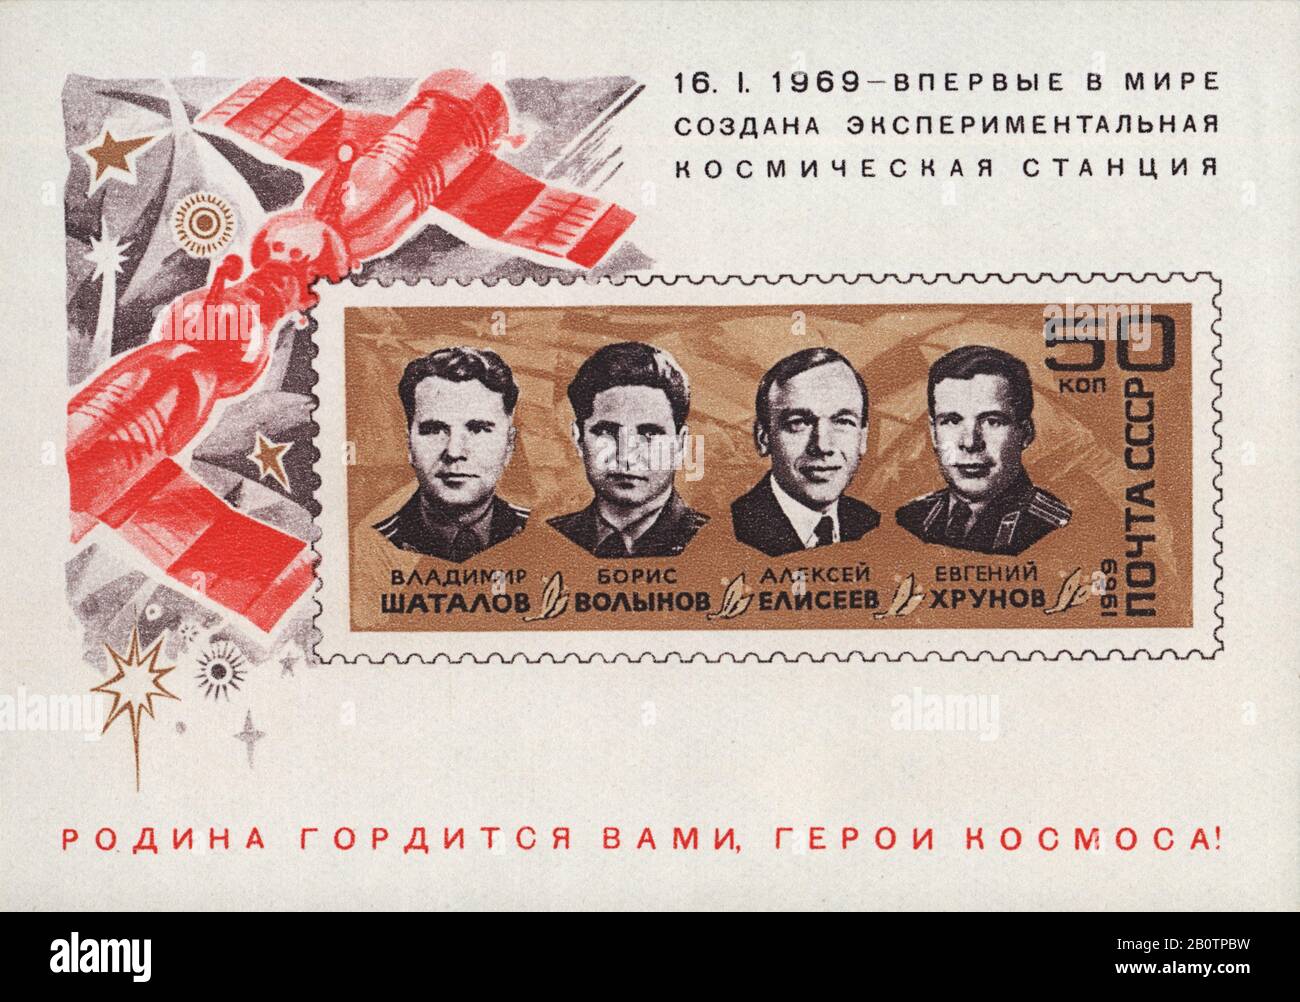 January 16, 1969 for the first time in the world created an experimental space station. Portrait of cosmonauts Volynov, Yeliseyev, Khrunov , Shatalov, Stock Photo